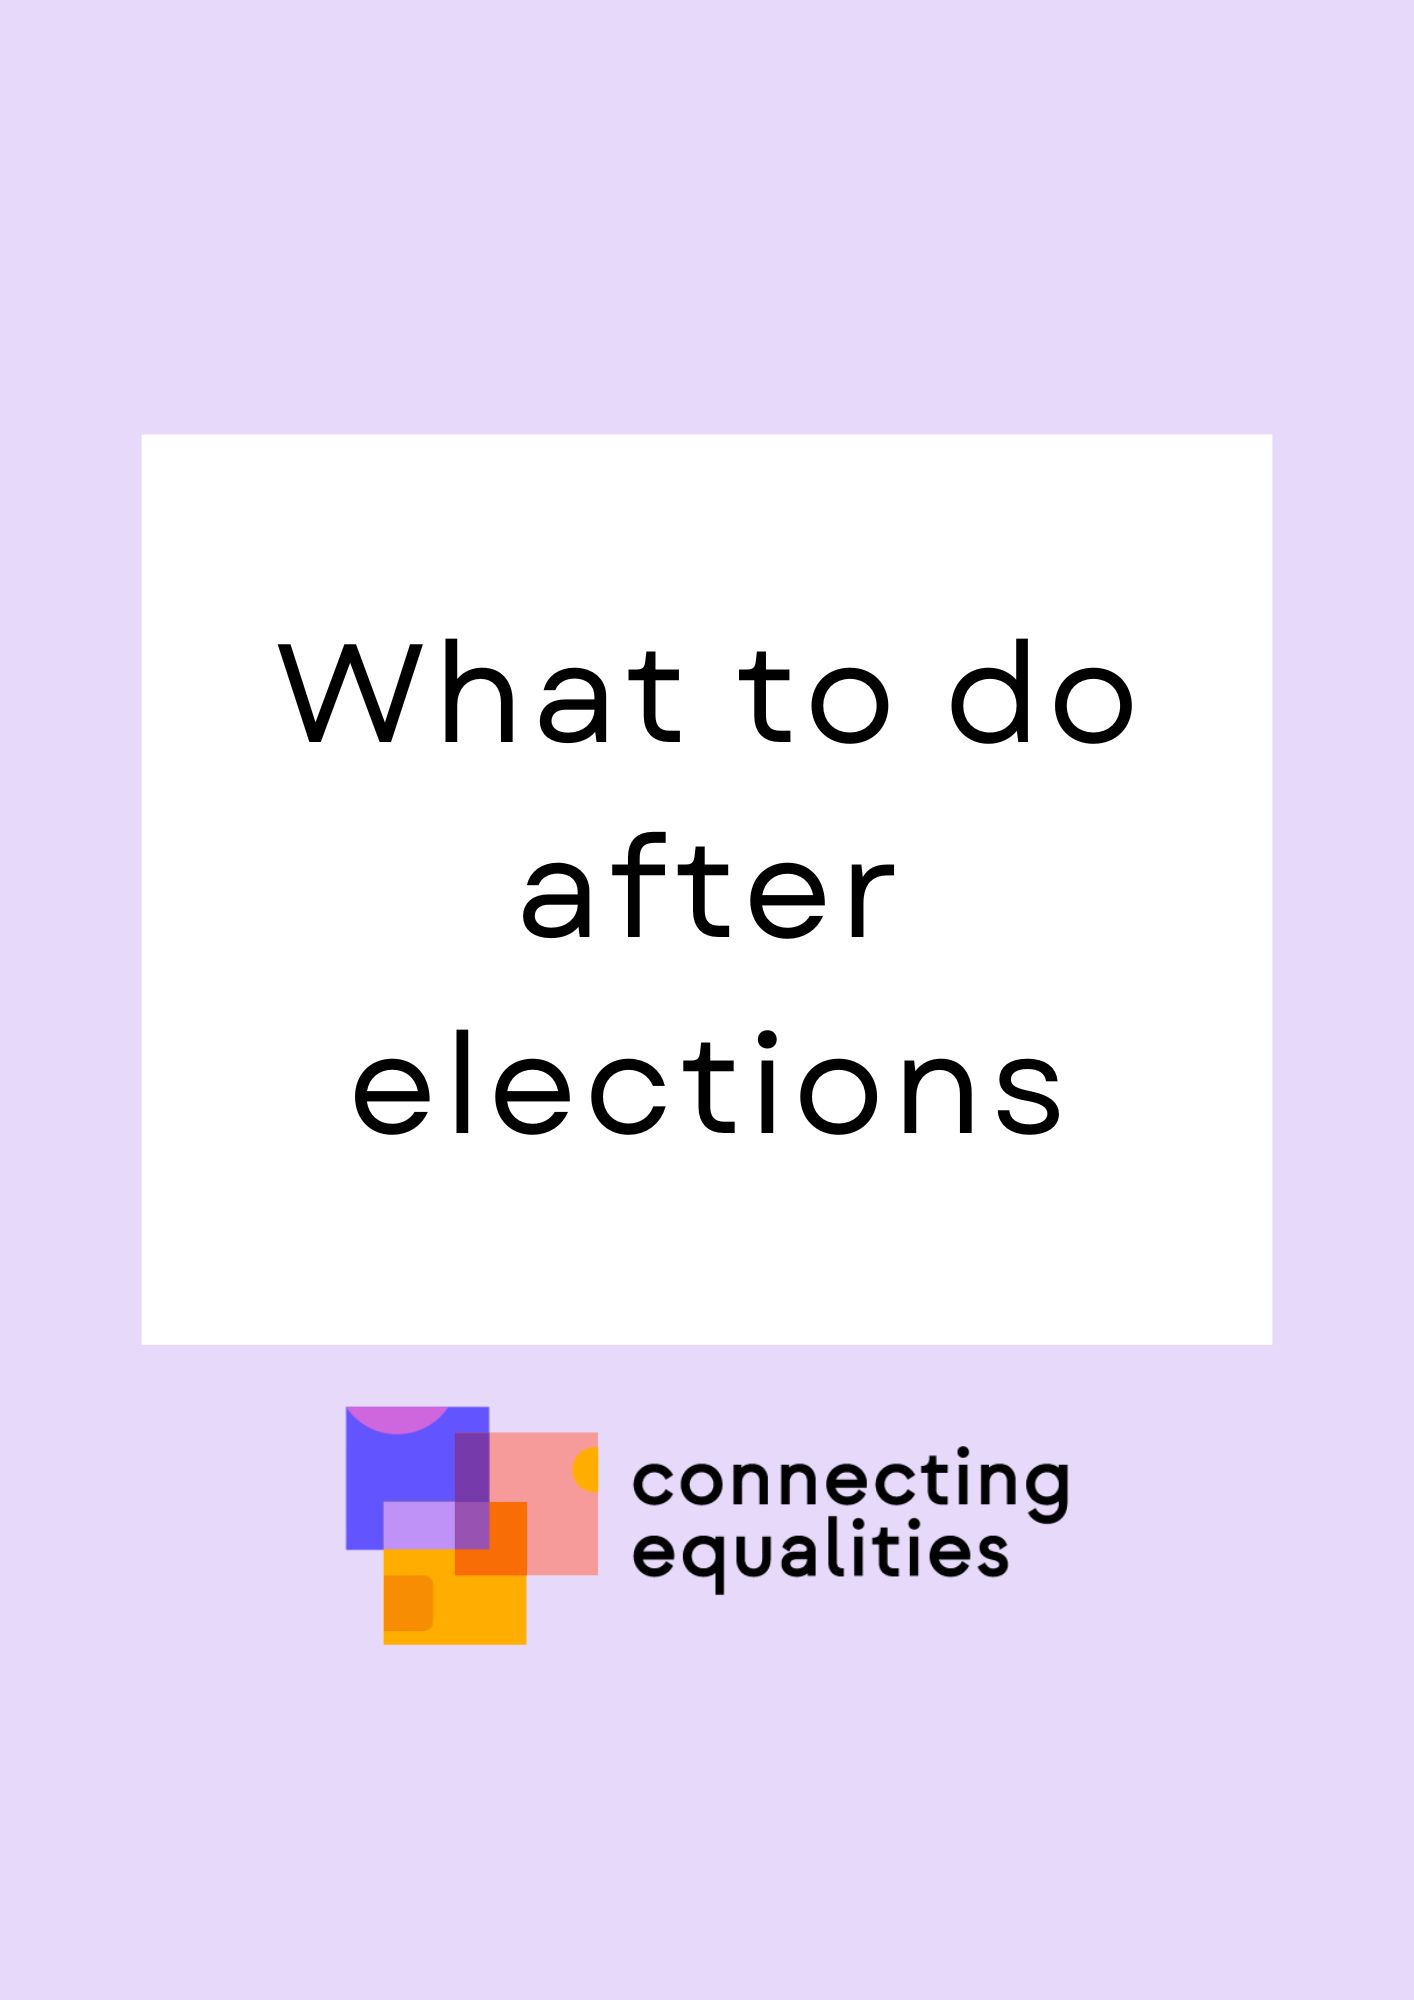 What to do after elections